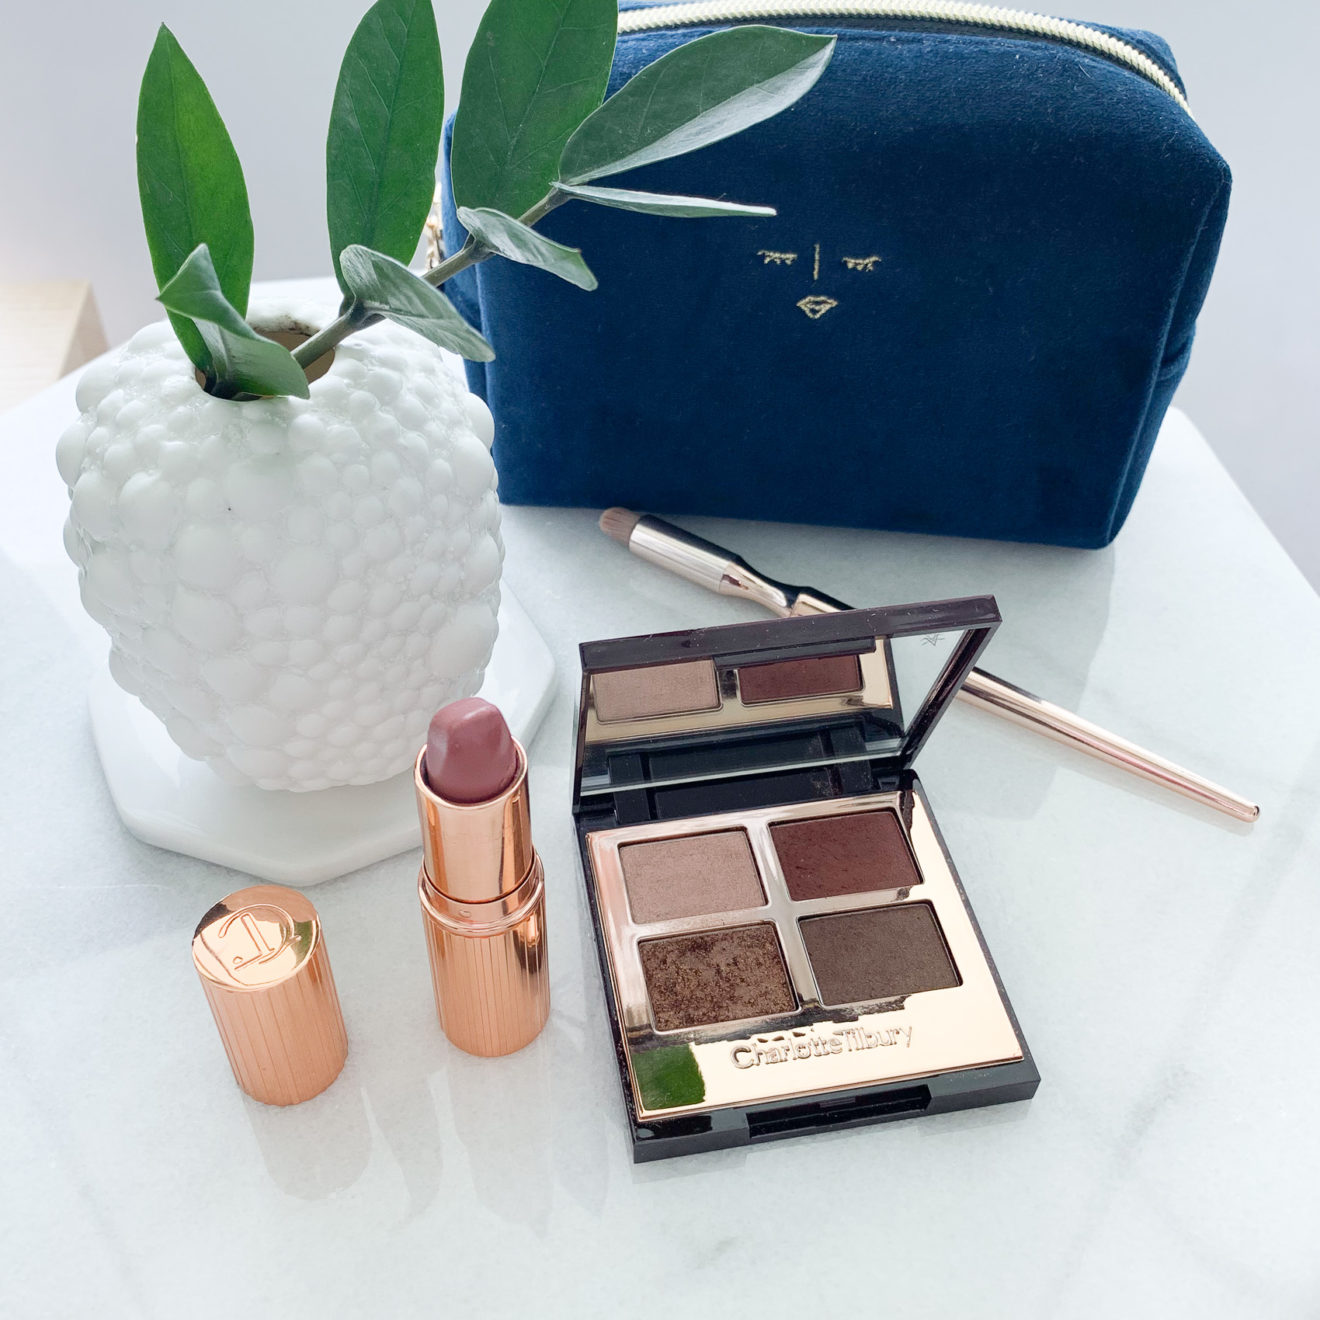 New Charlotte Tilbury Discoveries - Claire Baker